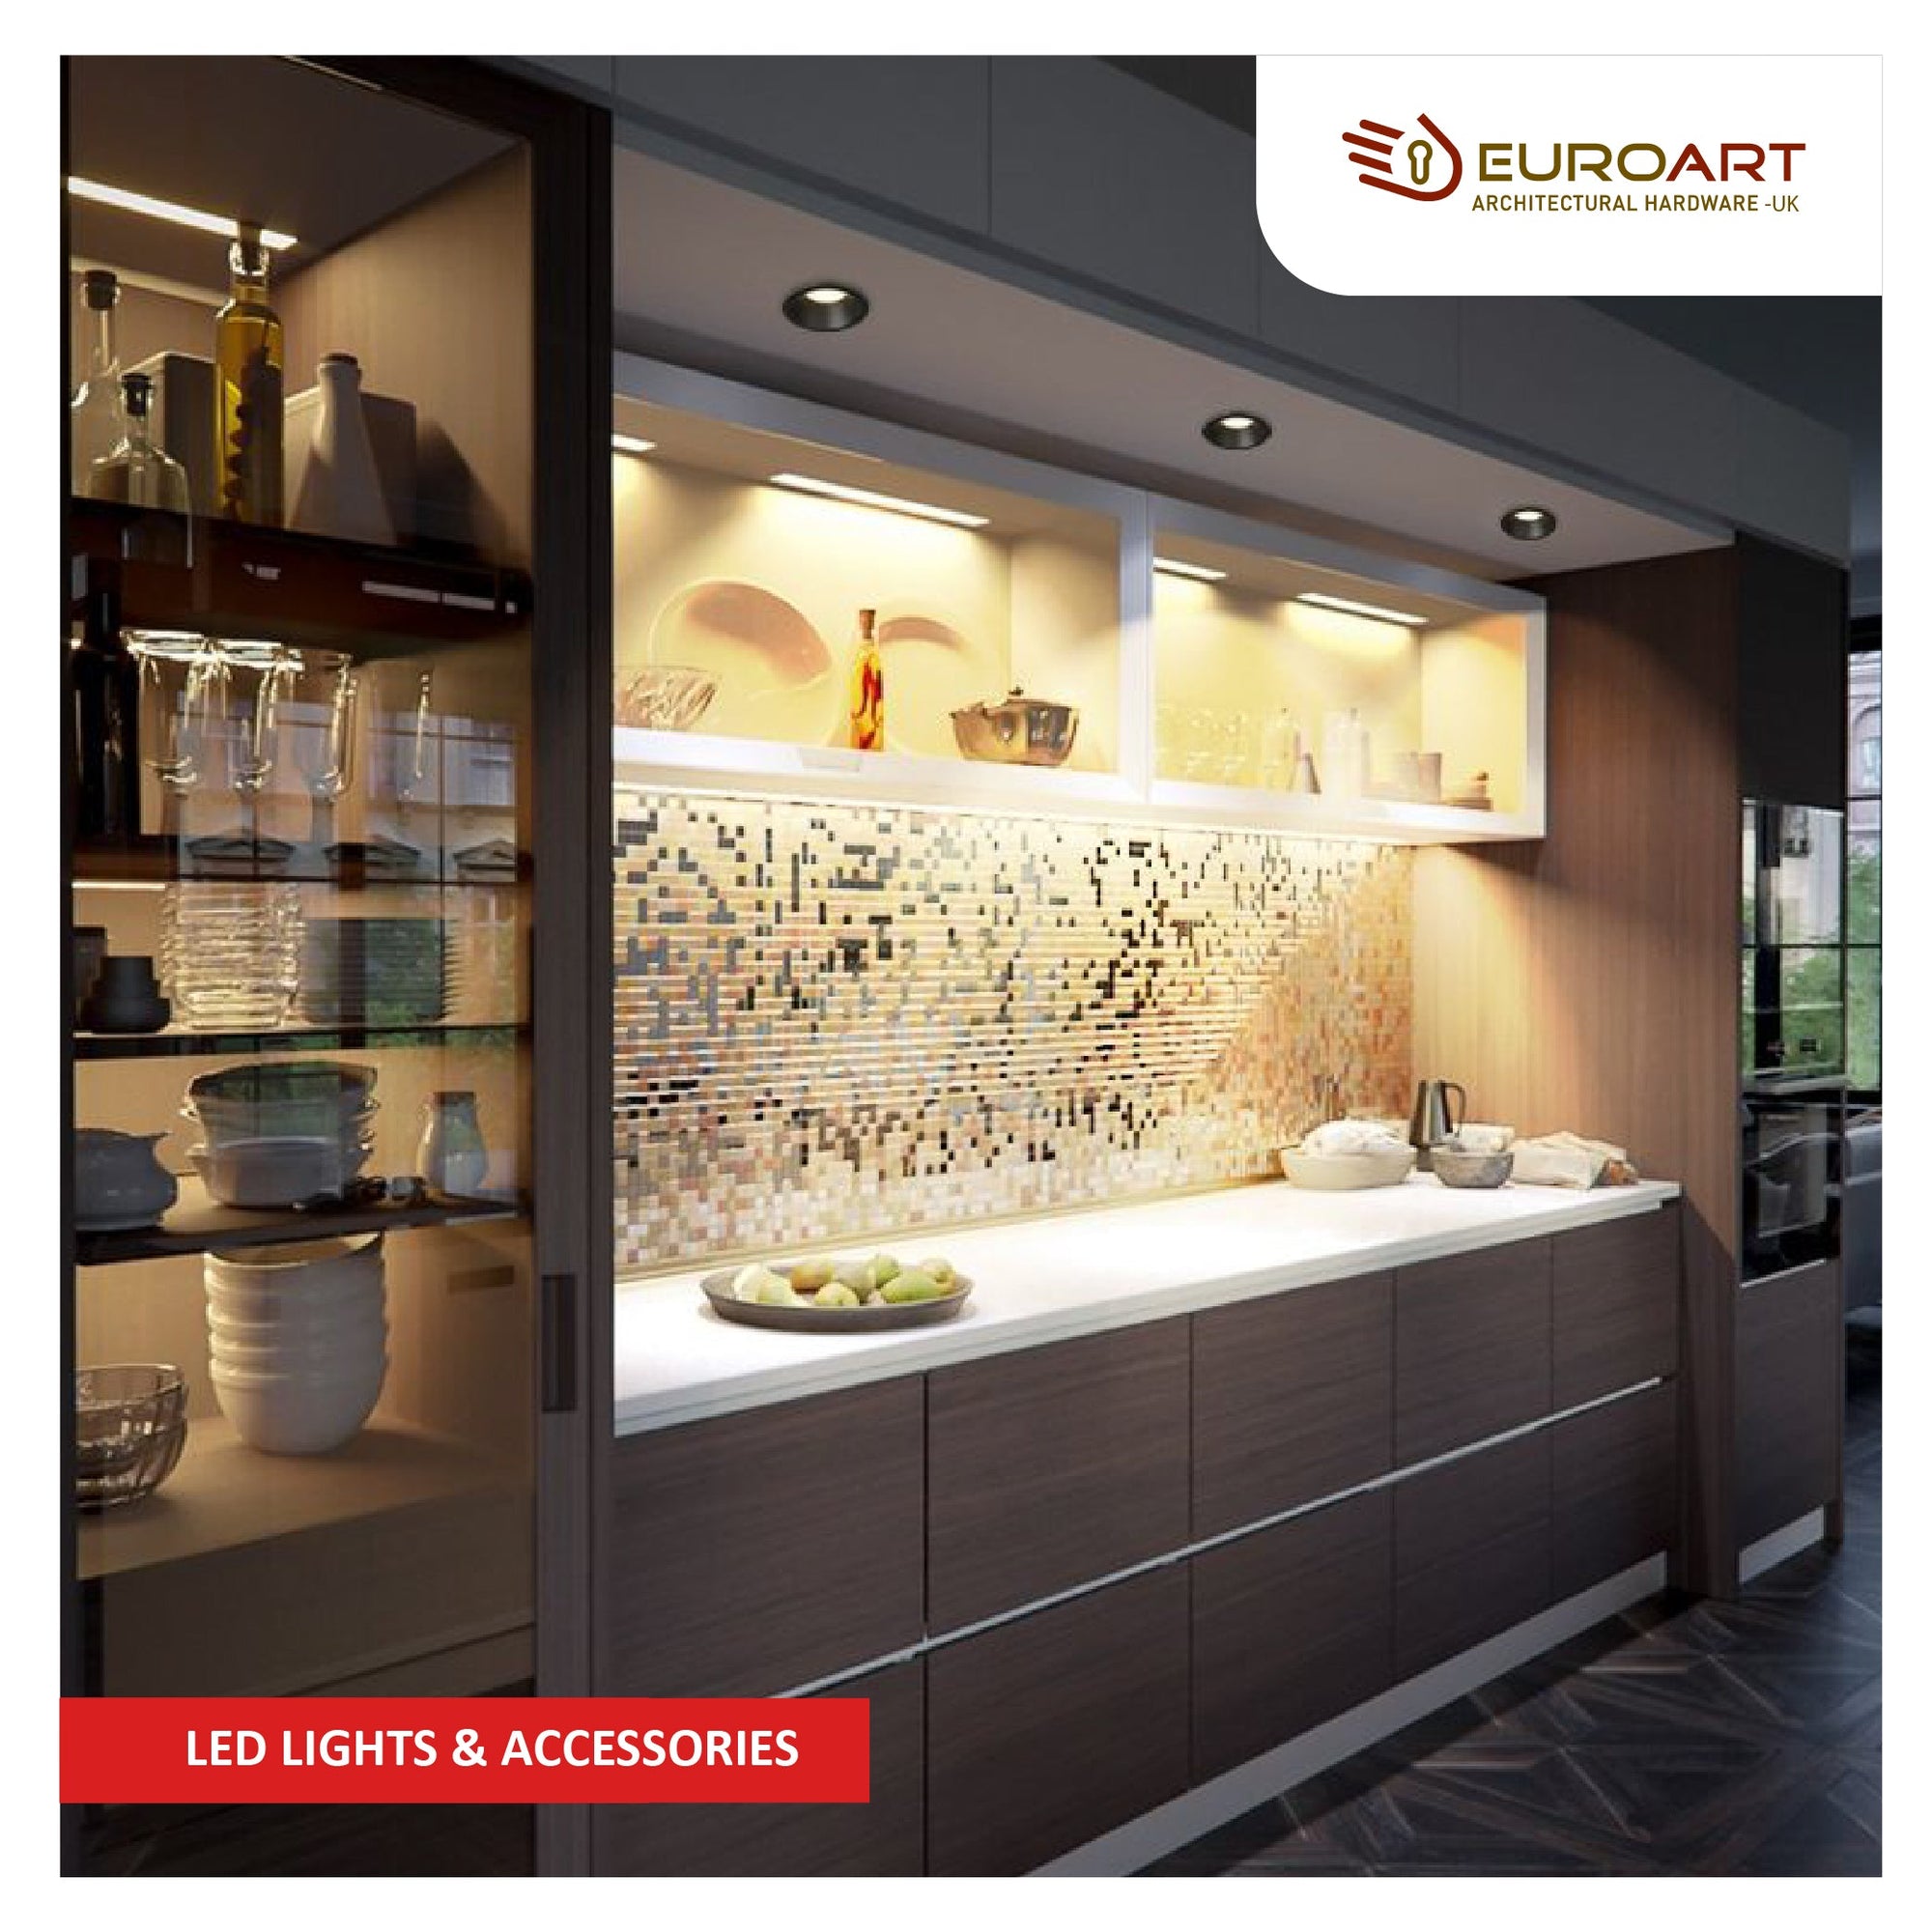 Illuminate your space with EuroArt LED Lights & Accessories by M. M. Noorbhoy & Co - High-quality lighting solutions for enhanced ambiance.